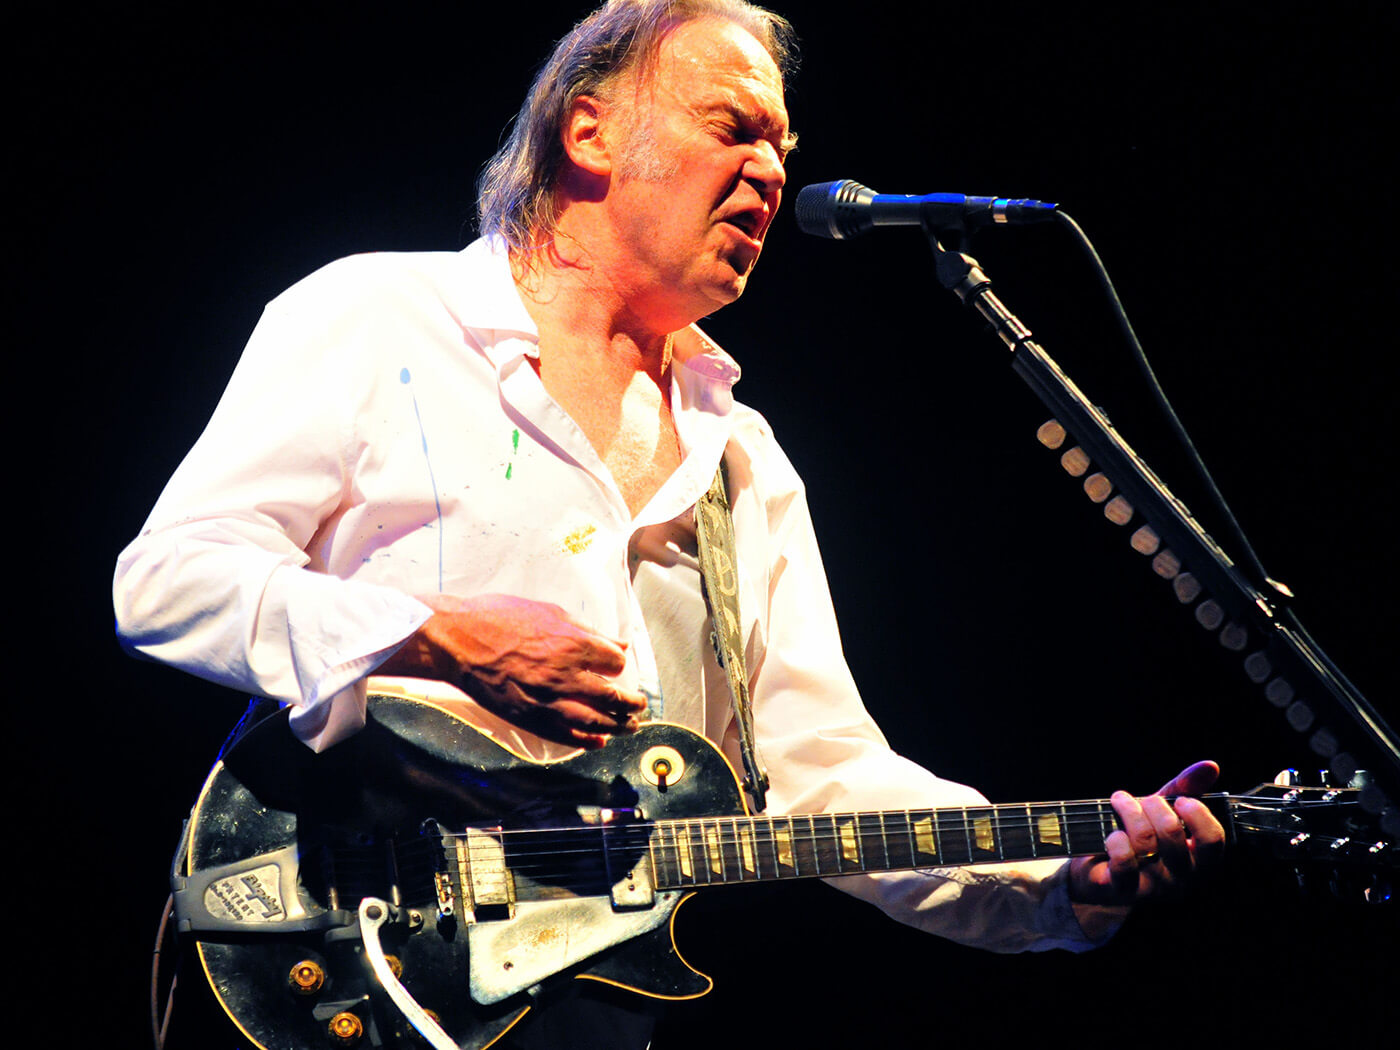 Neil Young performs on stage at Ahoy on June 7, 2009 in Rotterdam, Netherlands